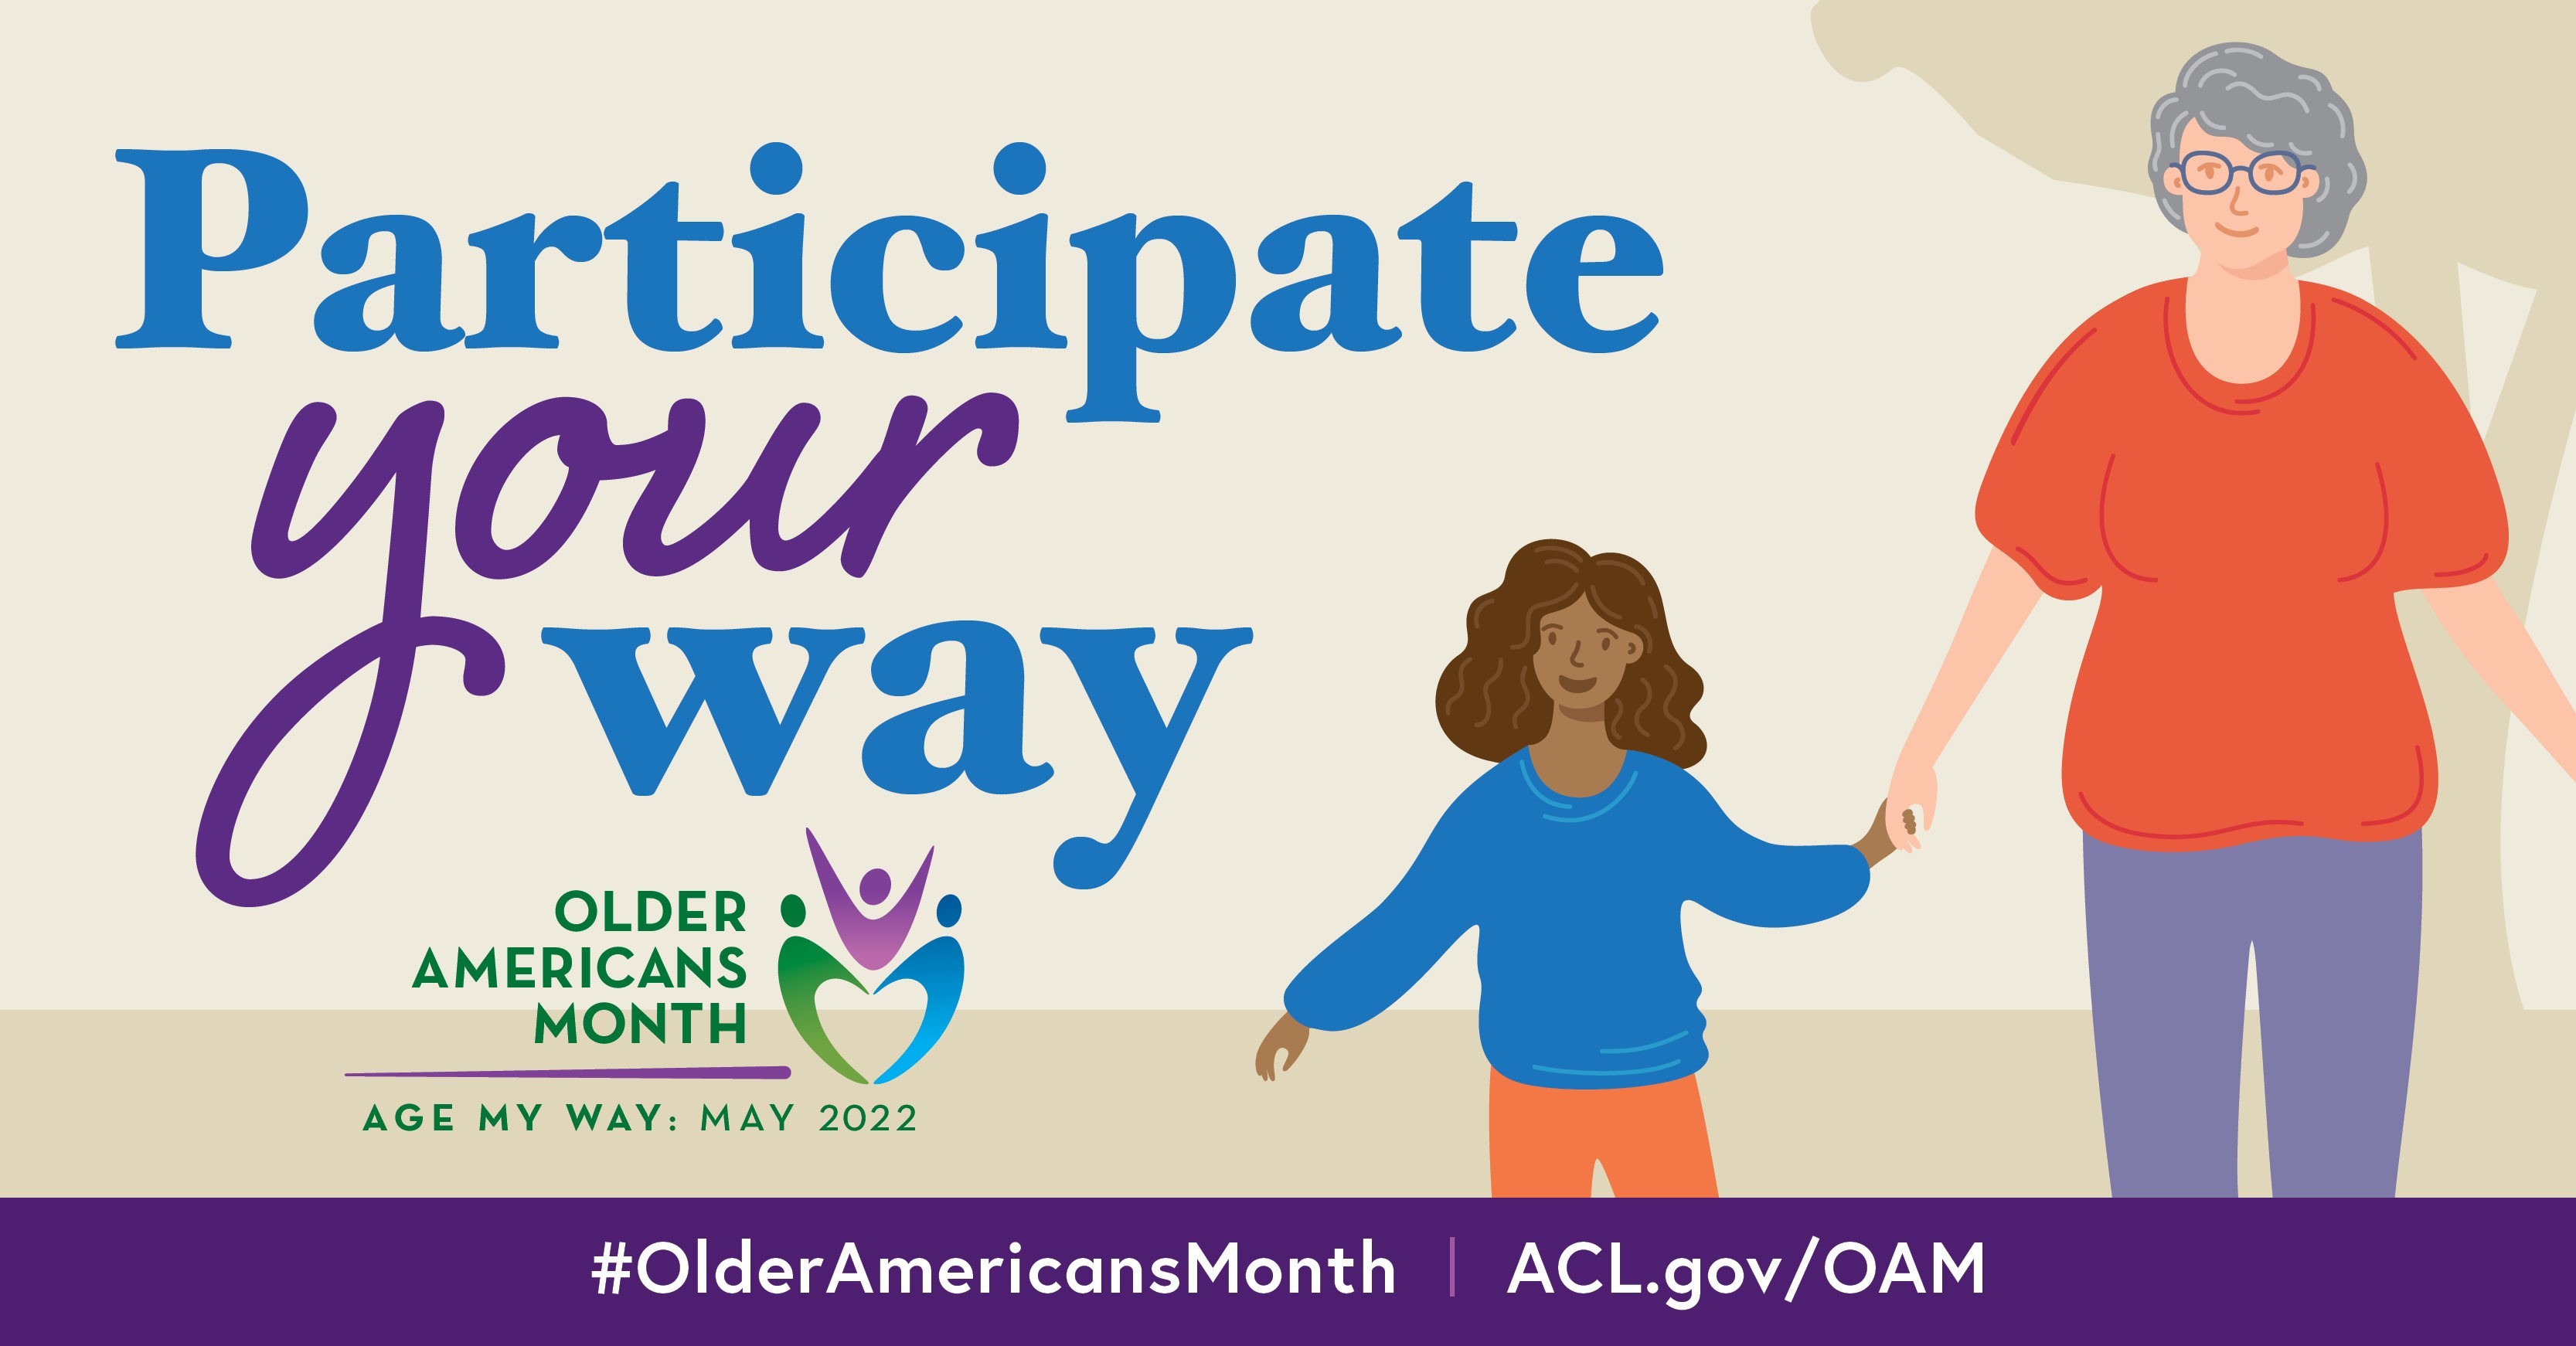 Participate Your Way. Older Americans Month, Age My Way: May 2022. #OlderAmericansMonth ACL.gov/OAM